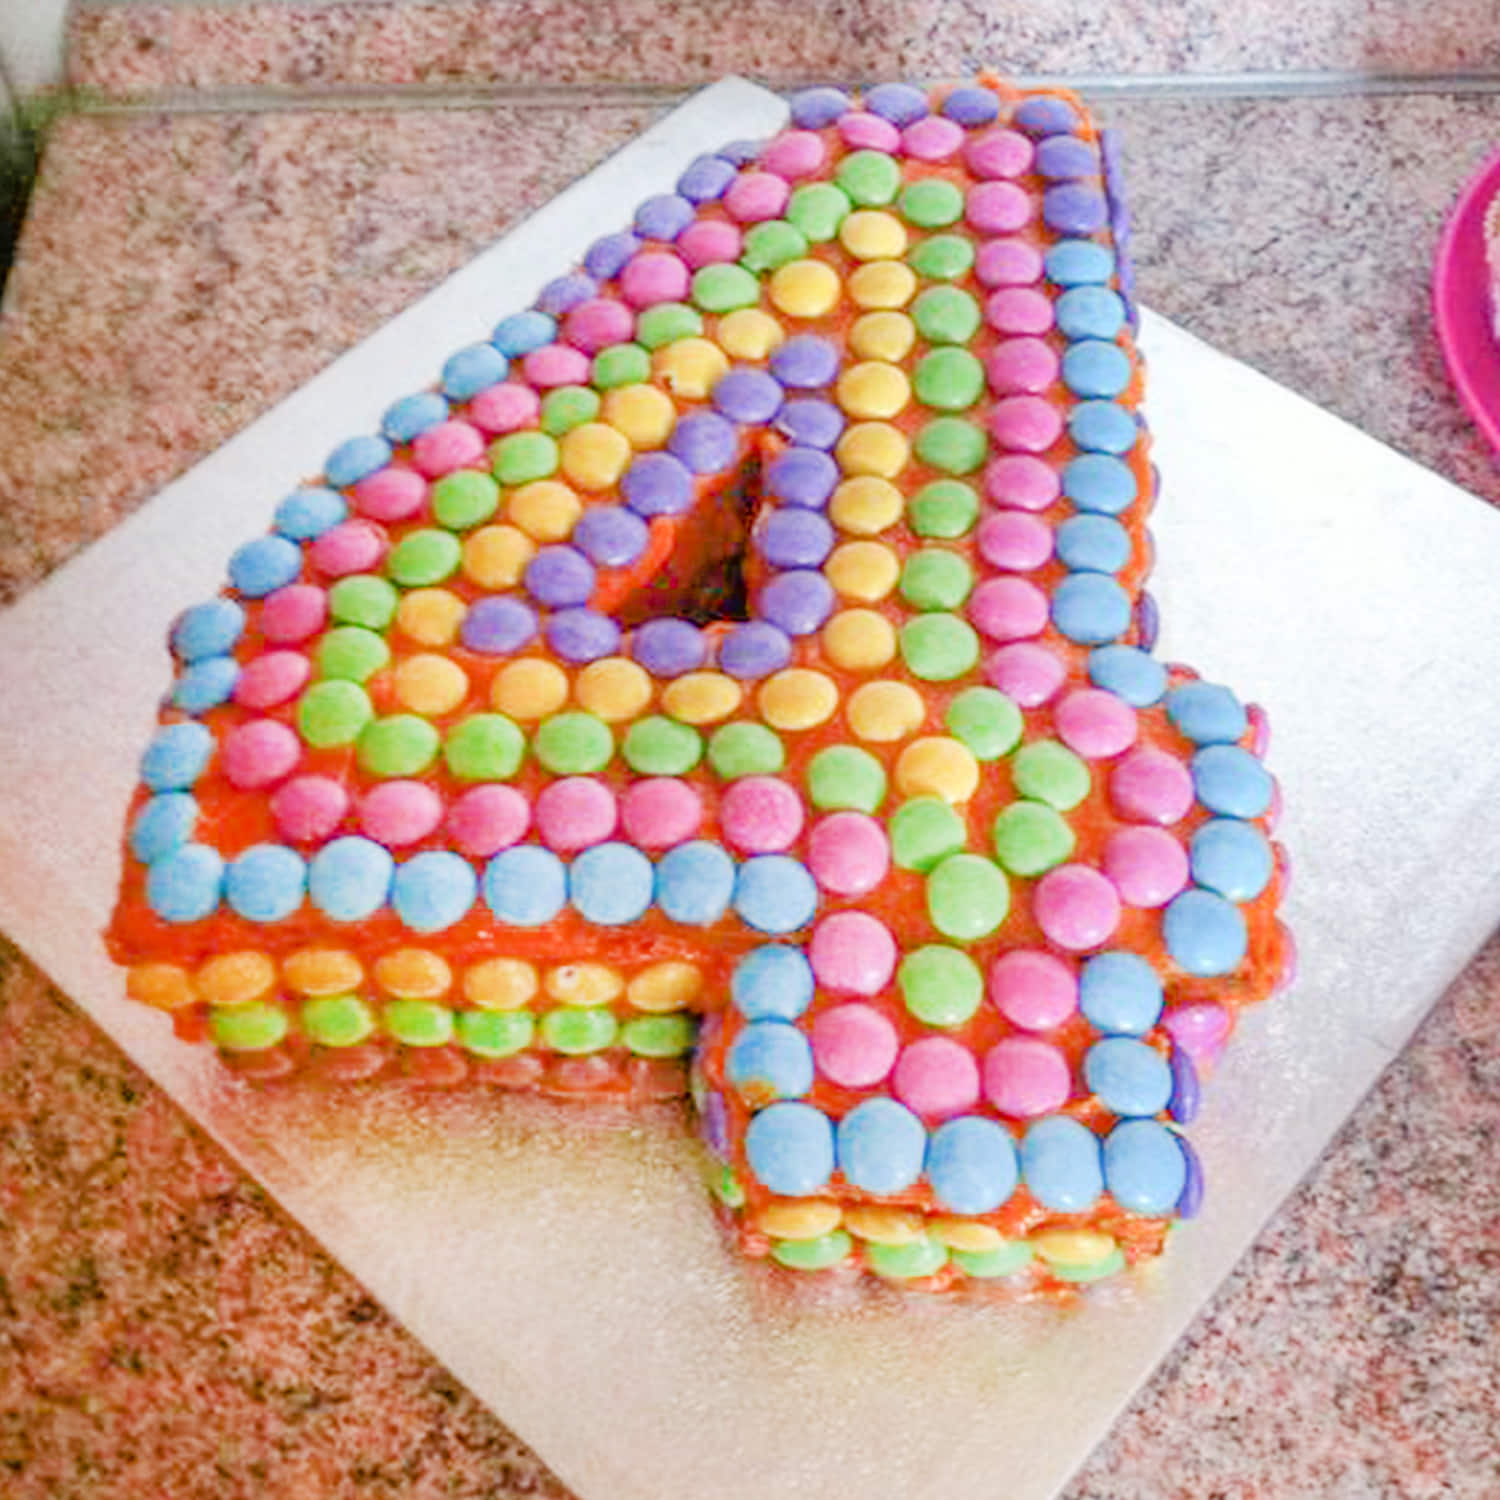 theme cake #4 number cake #choclate... - Anagha's kitchen | Facebook